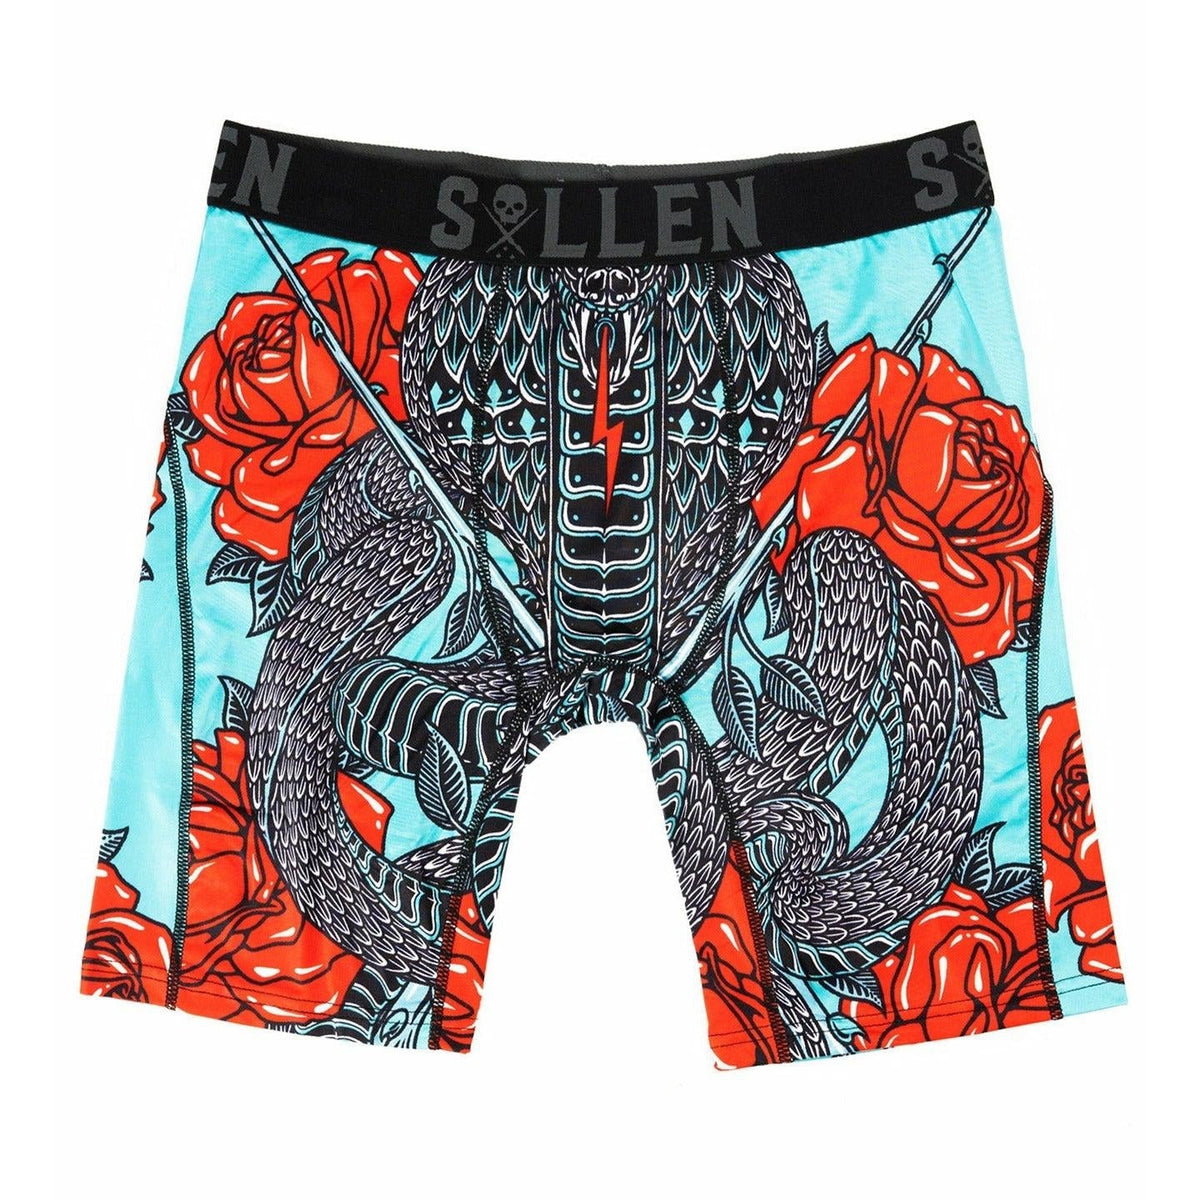 SULLEN-ART-COLLECTIVE-COILS-BOXERS - BOXER - Synik Clothing - synikclothing.com